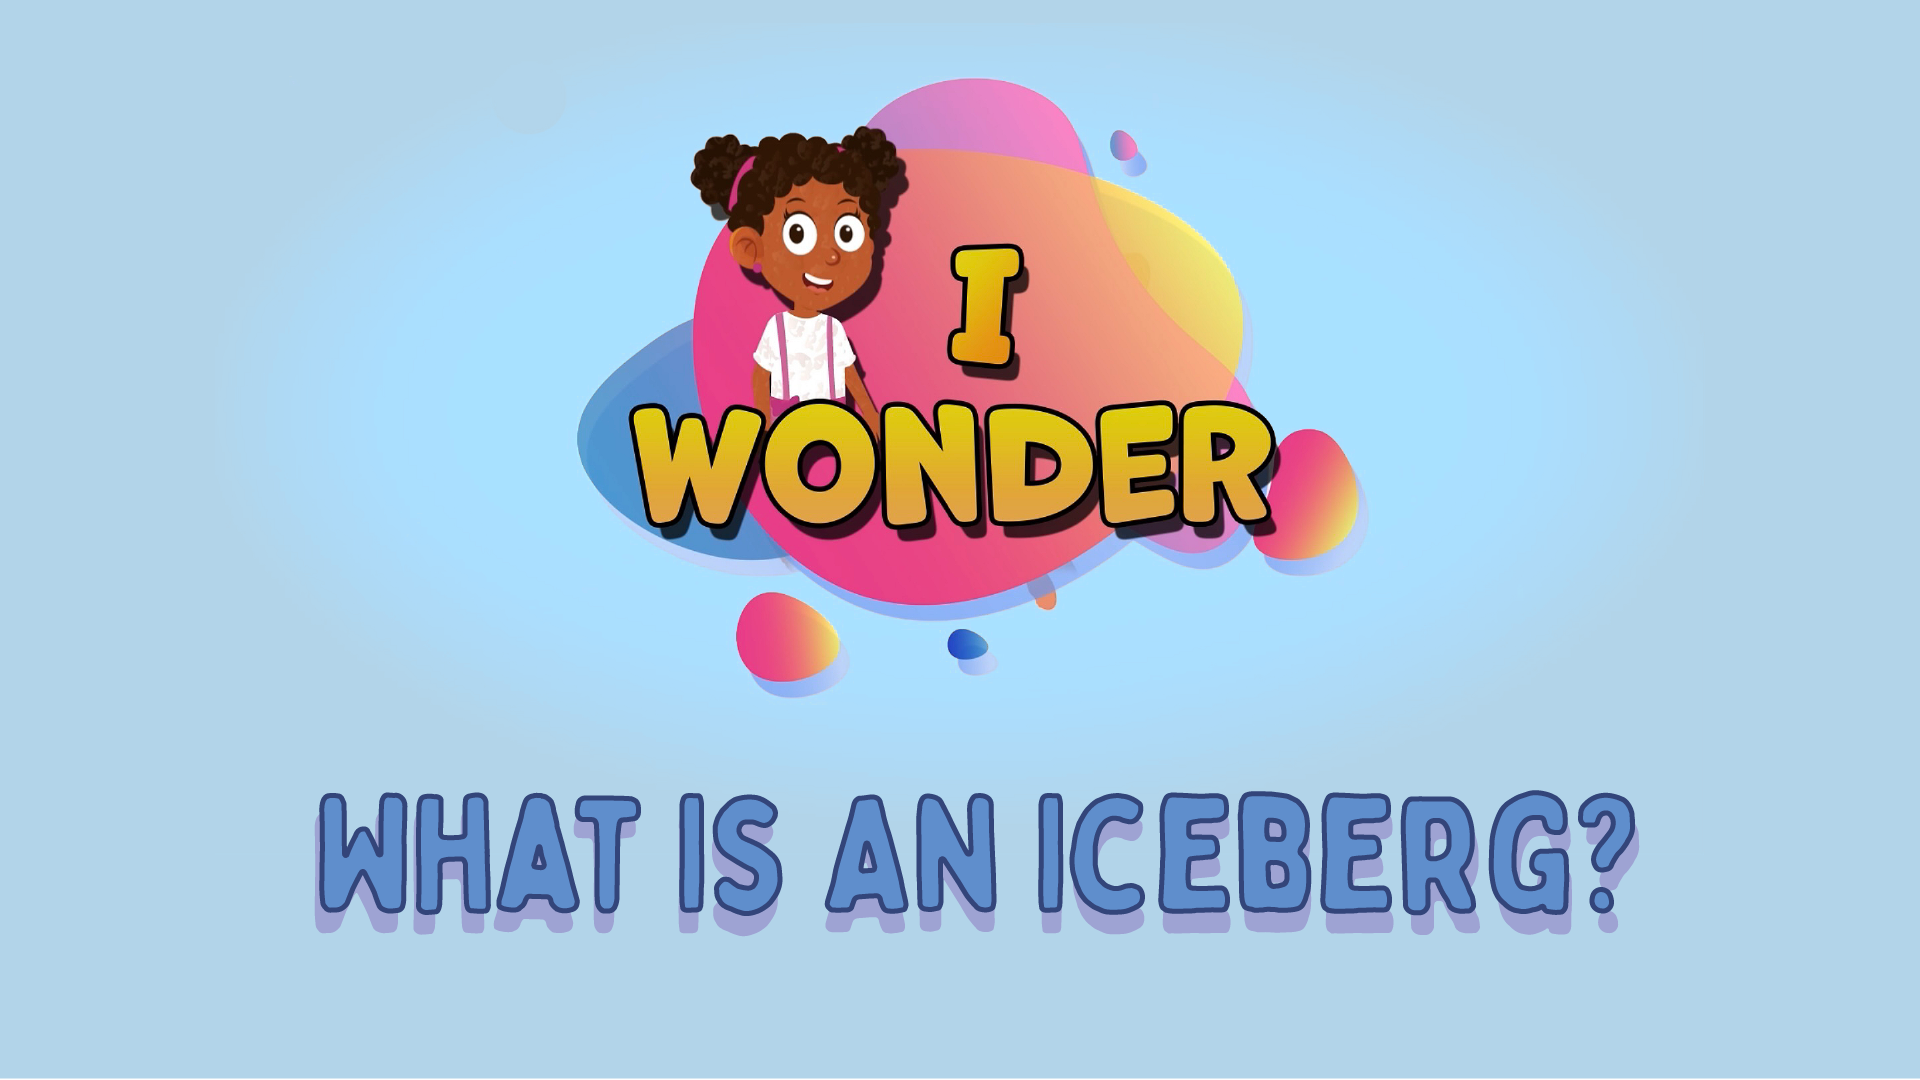 What Is An Iceberg?